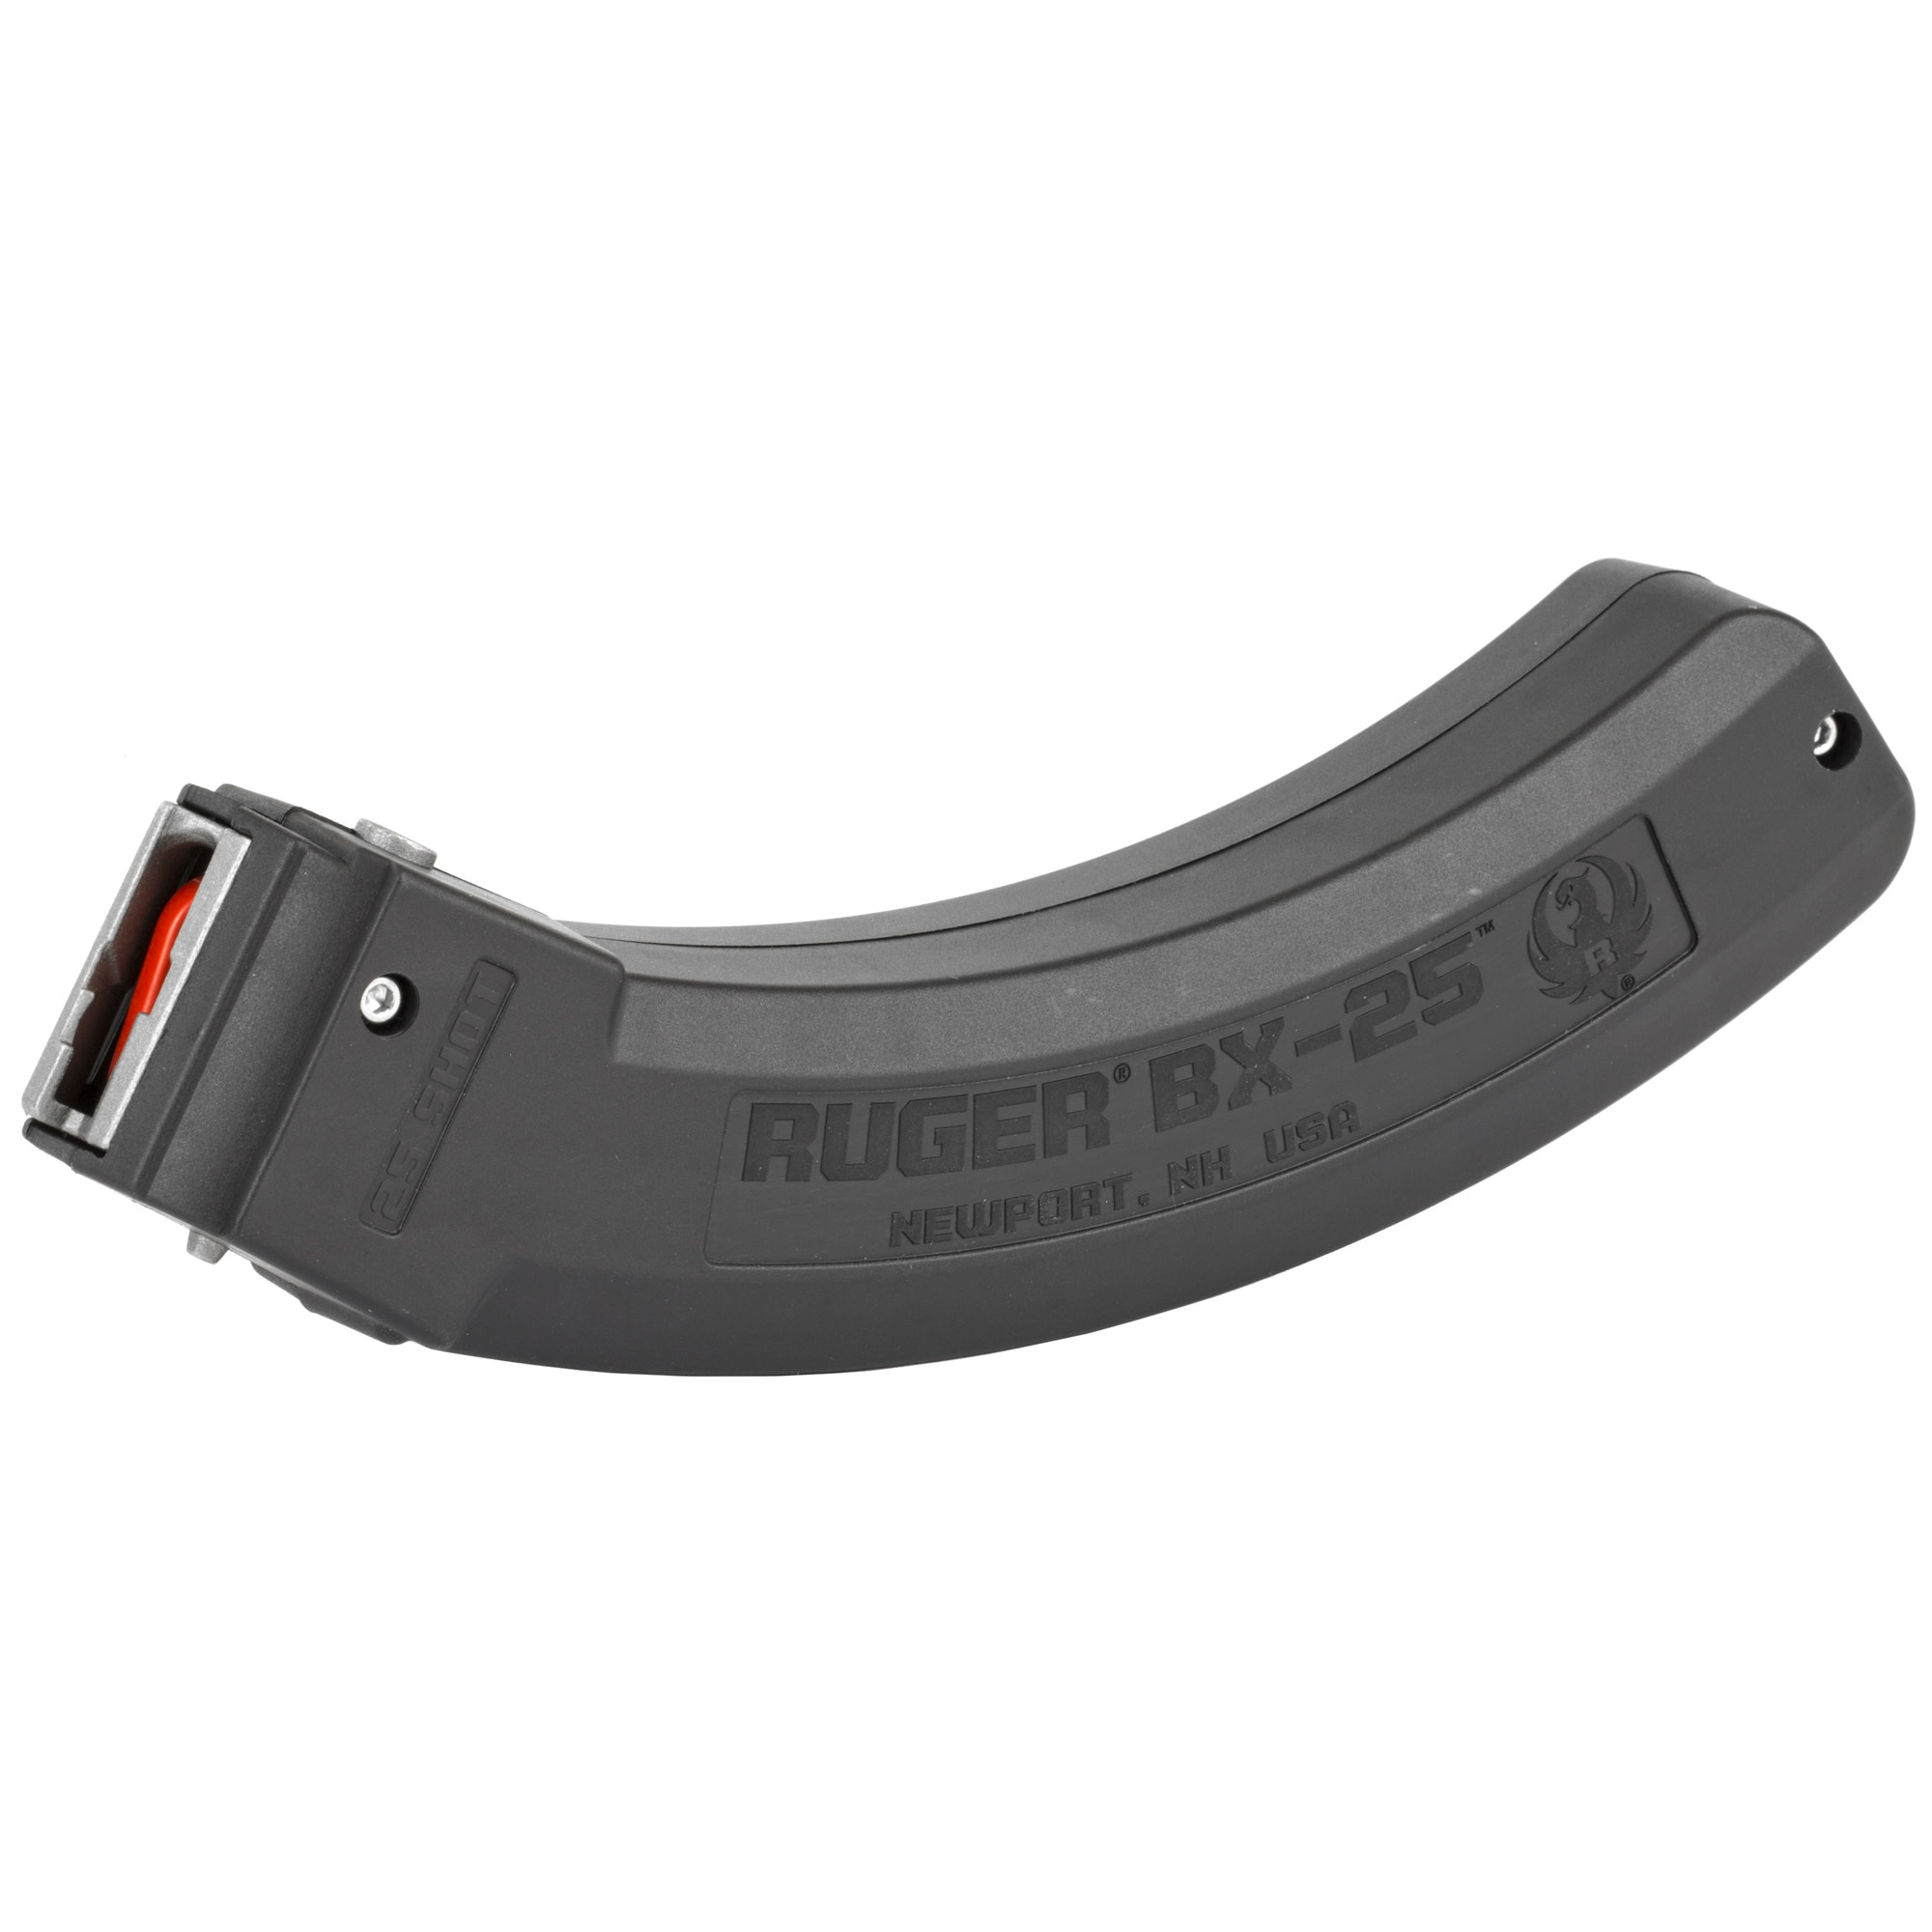 Ruger, BX-25, 22LR, 25 Rounds, Fits 10/22 Rifle Magazine,